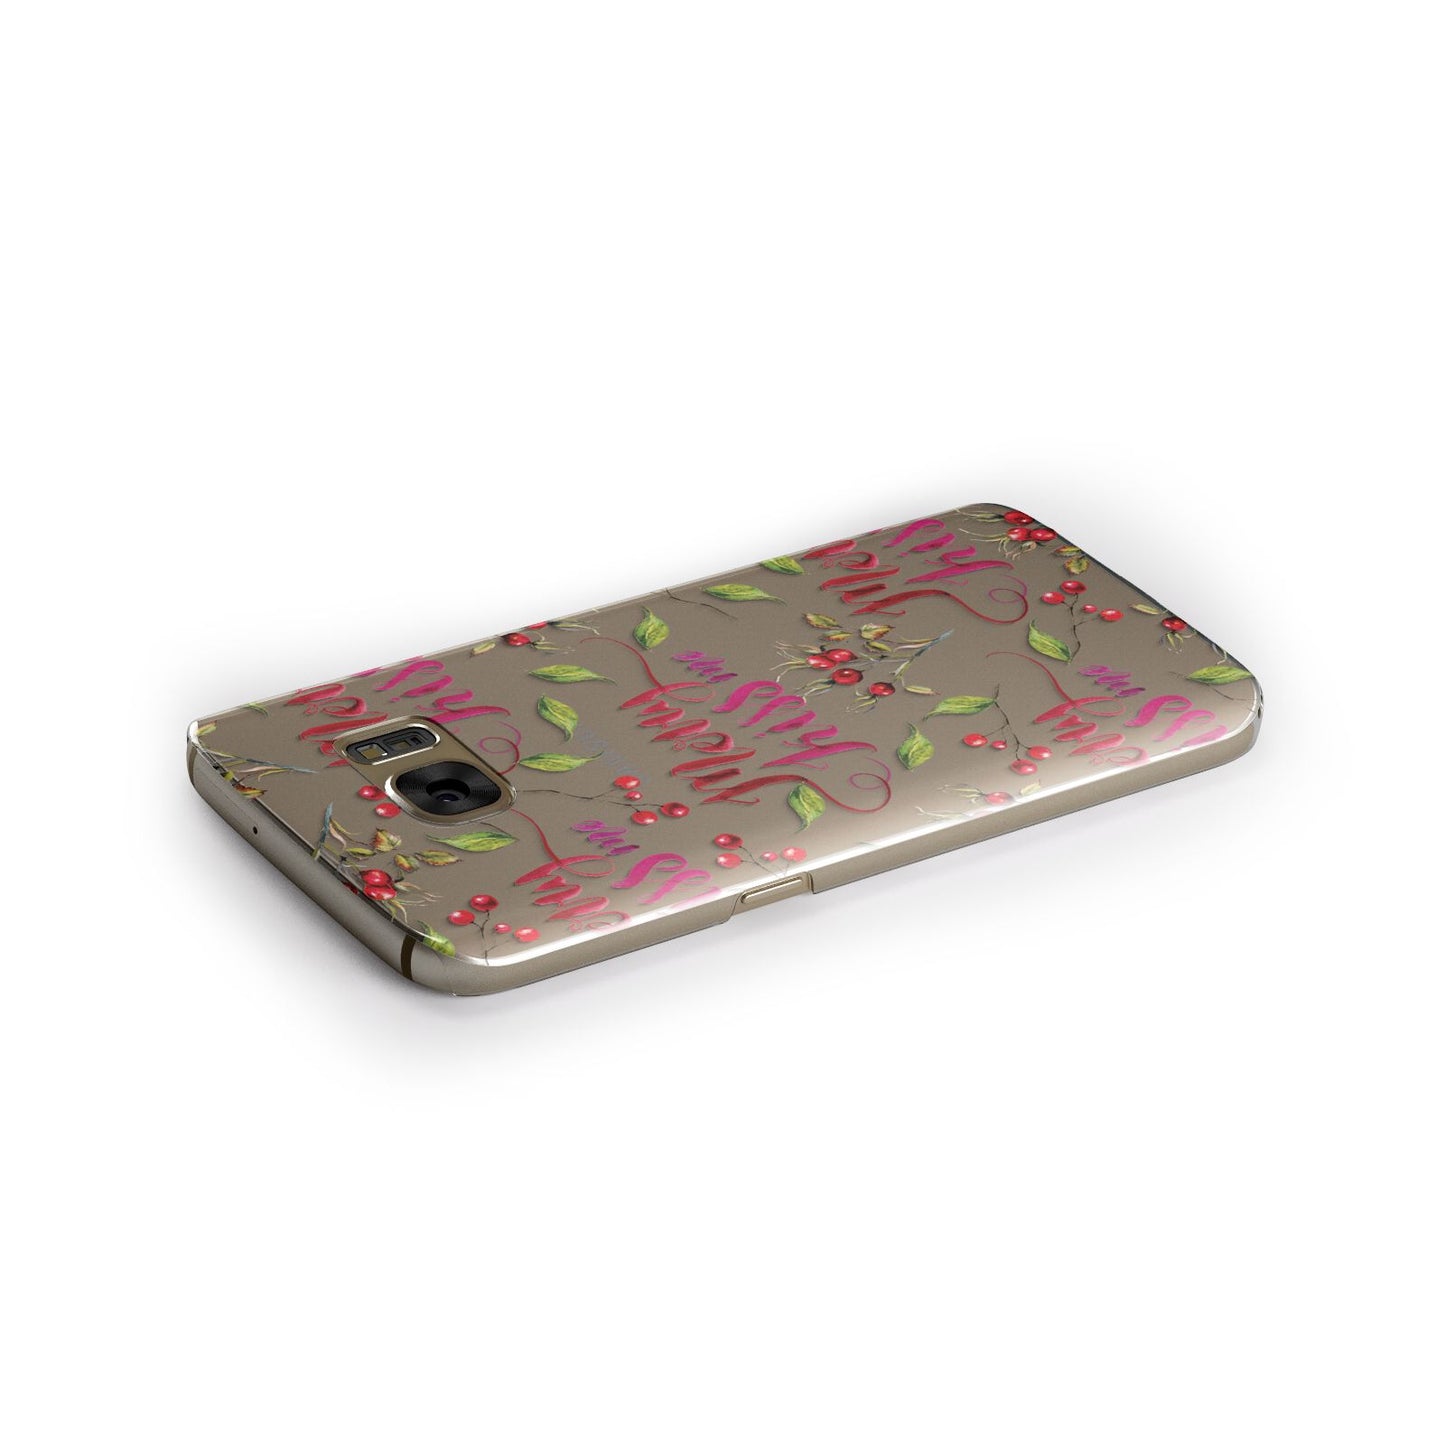 Merry kiss me Samsung Galaxy Case Side Close Up